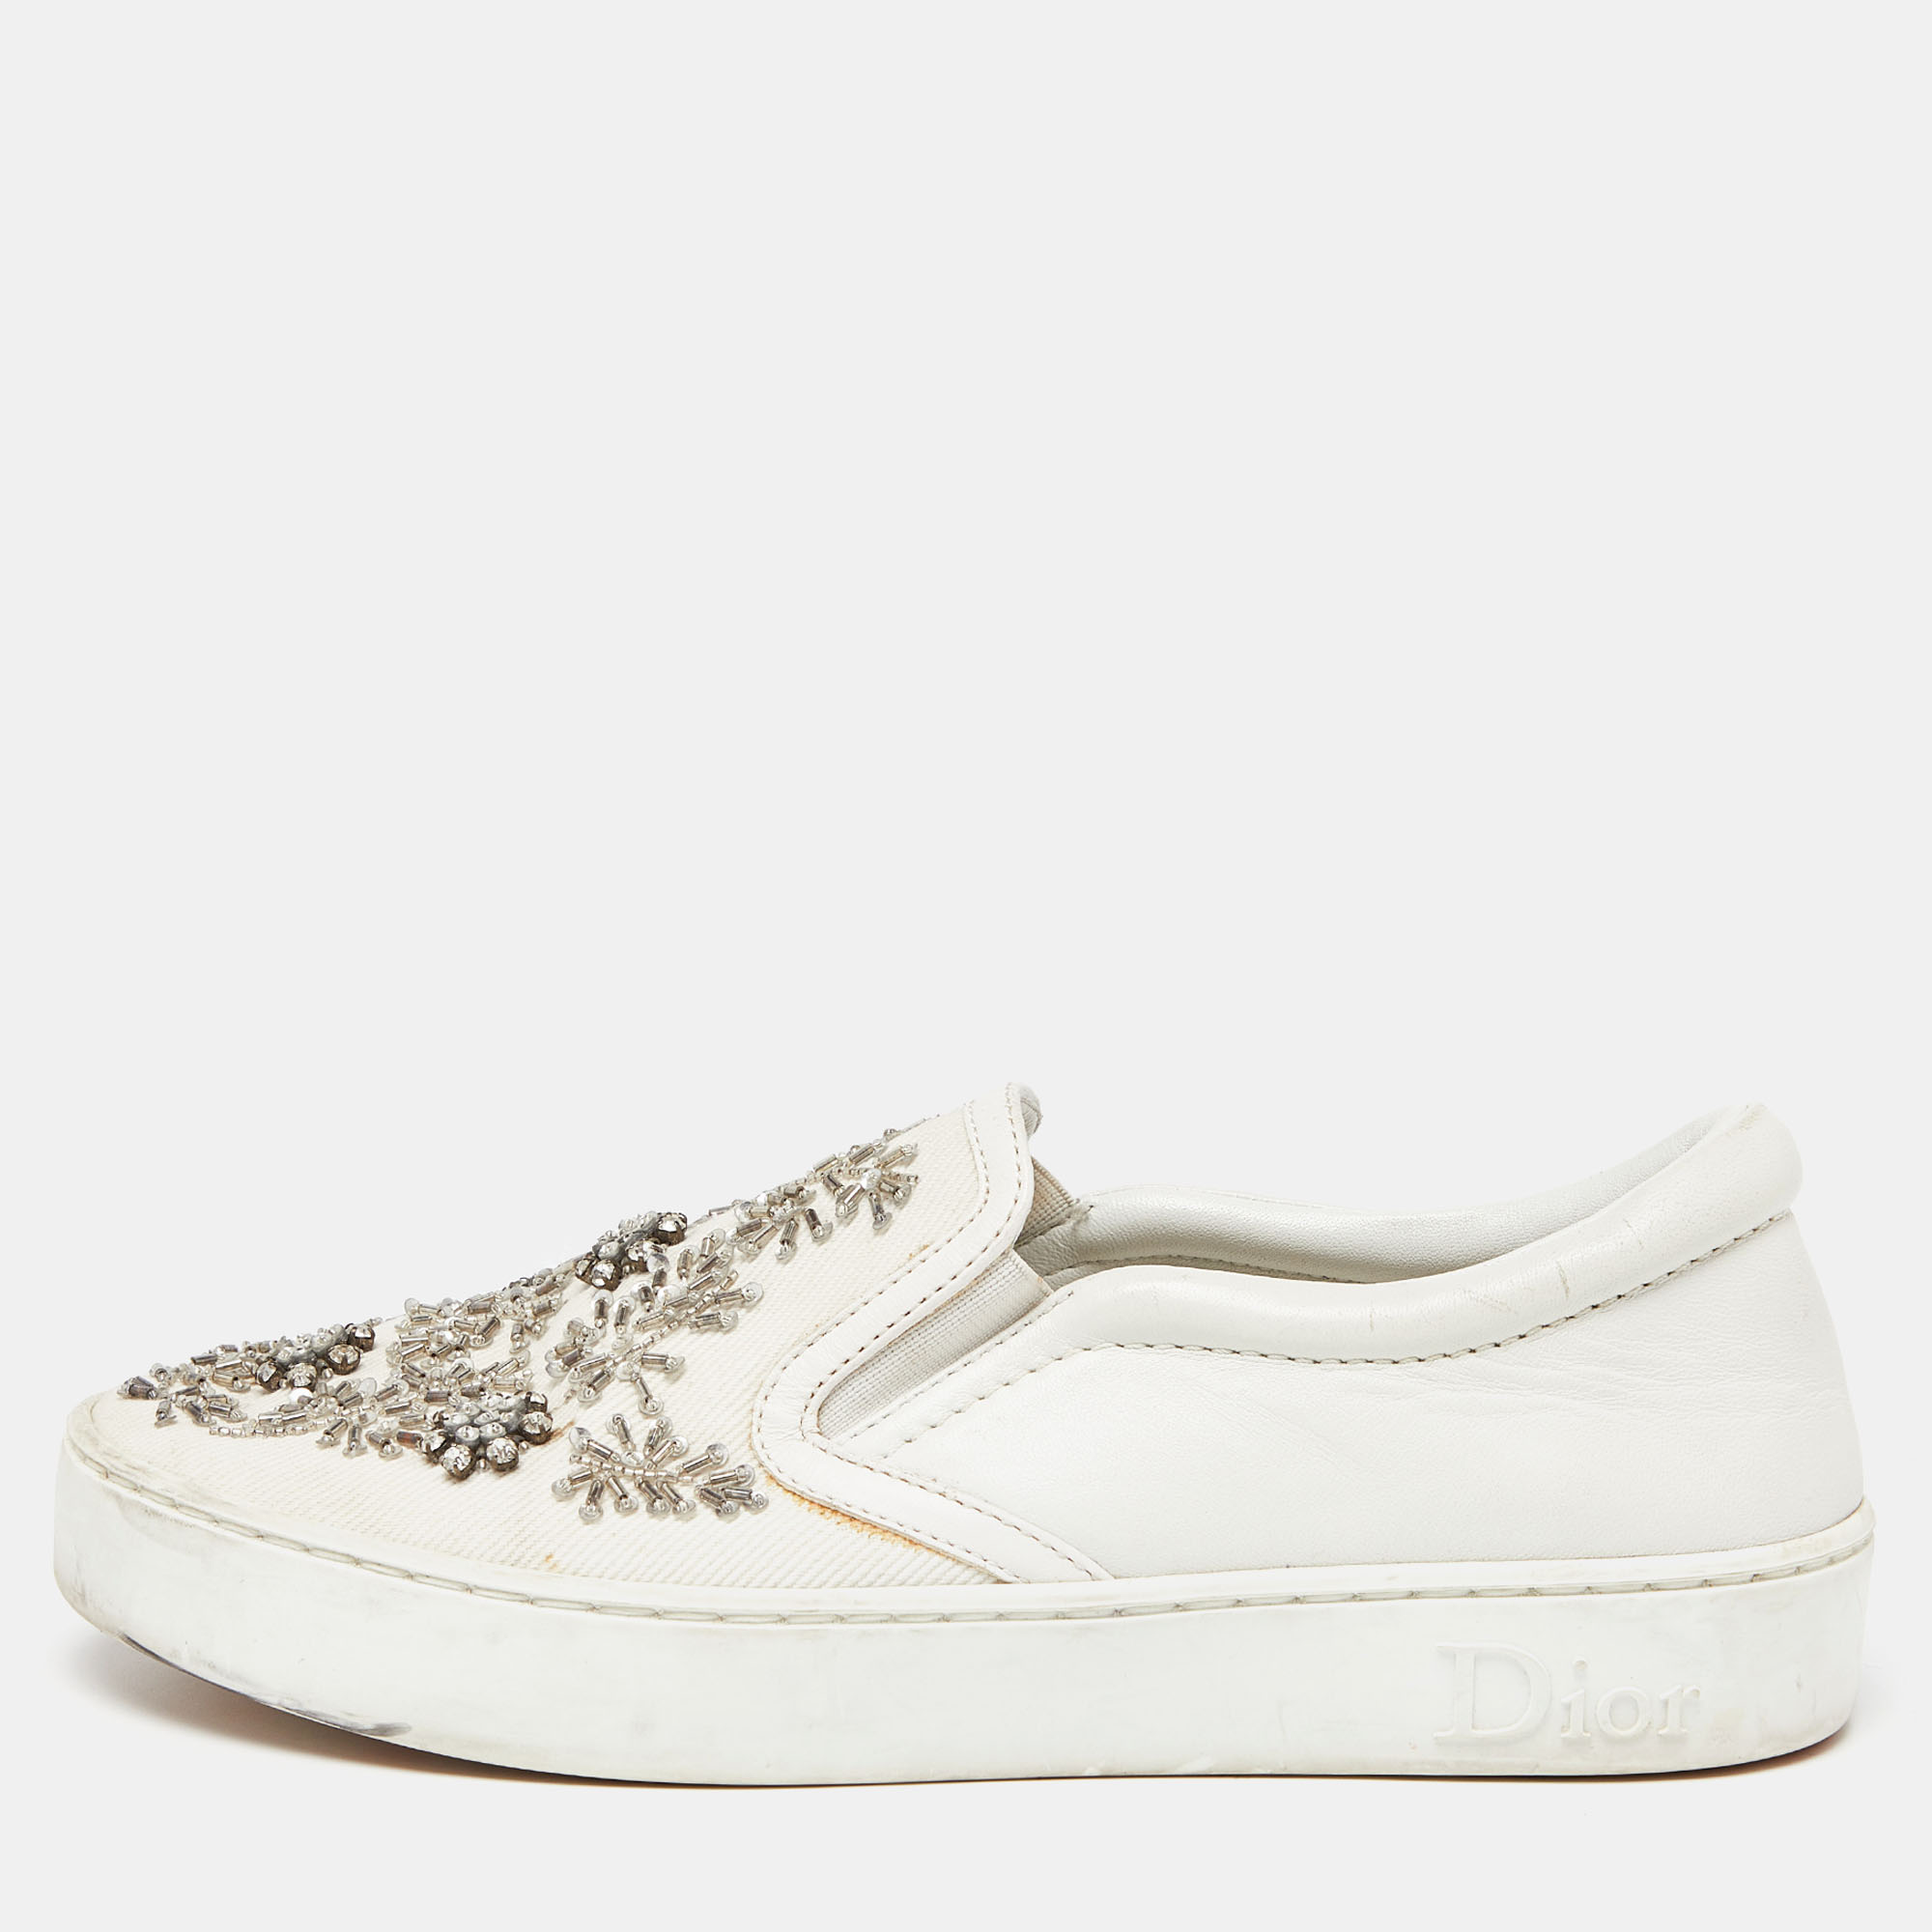 Easy to slip into these chic sneakers from Dior will be your new favorite They have been crafted from white leather and are complete with embellished uppers.